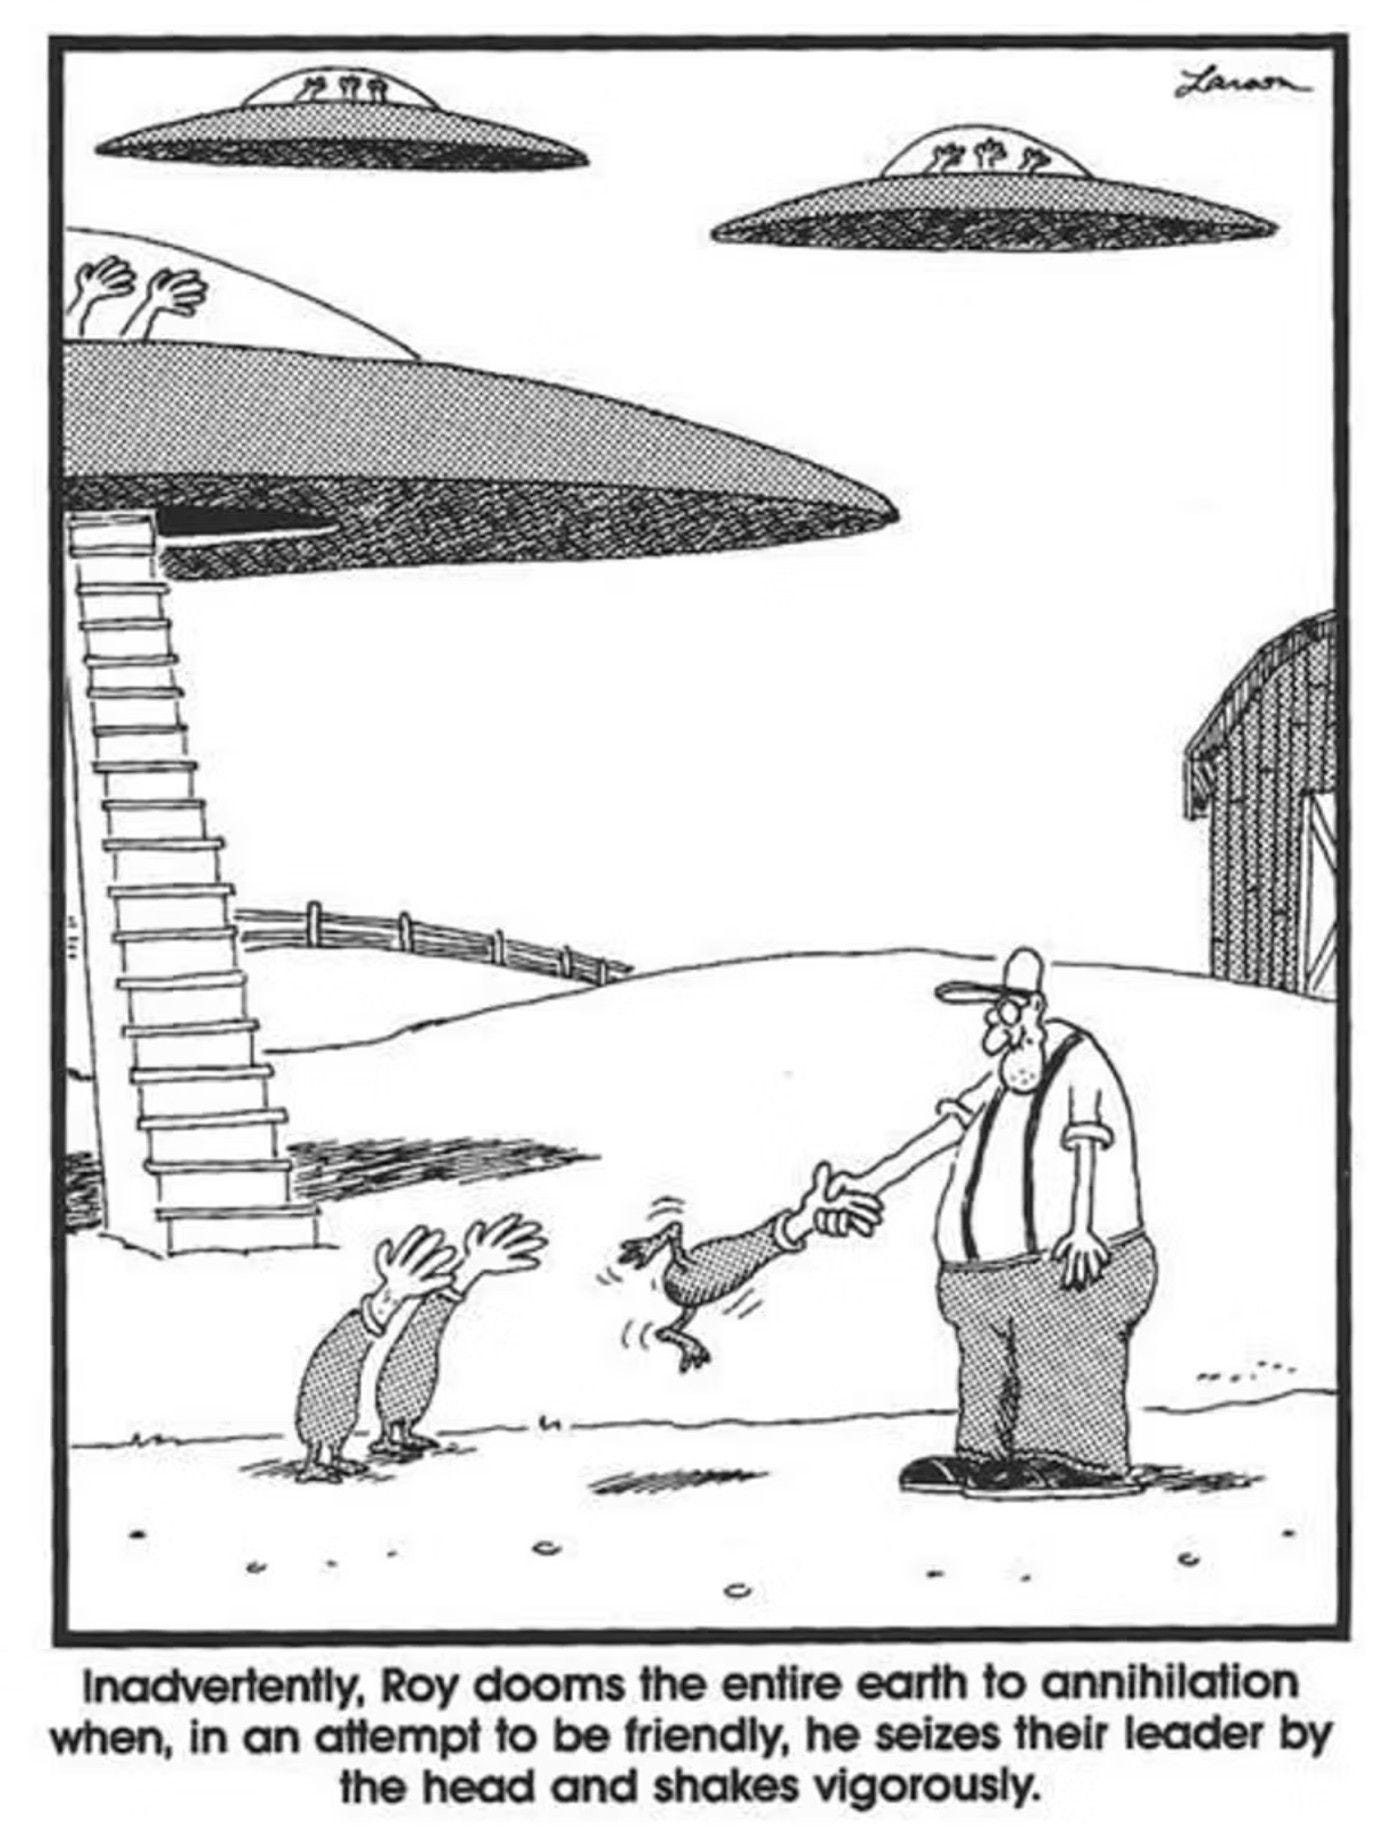 the far side roys shakes an alien's hand only to realize that's its head